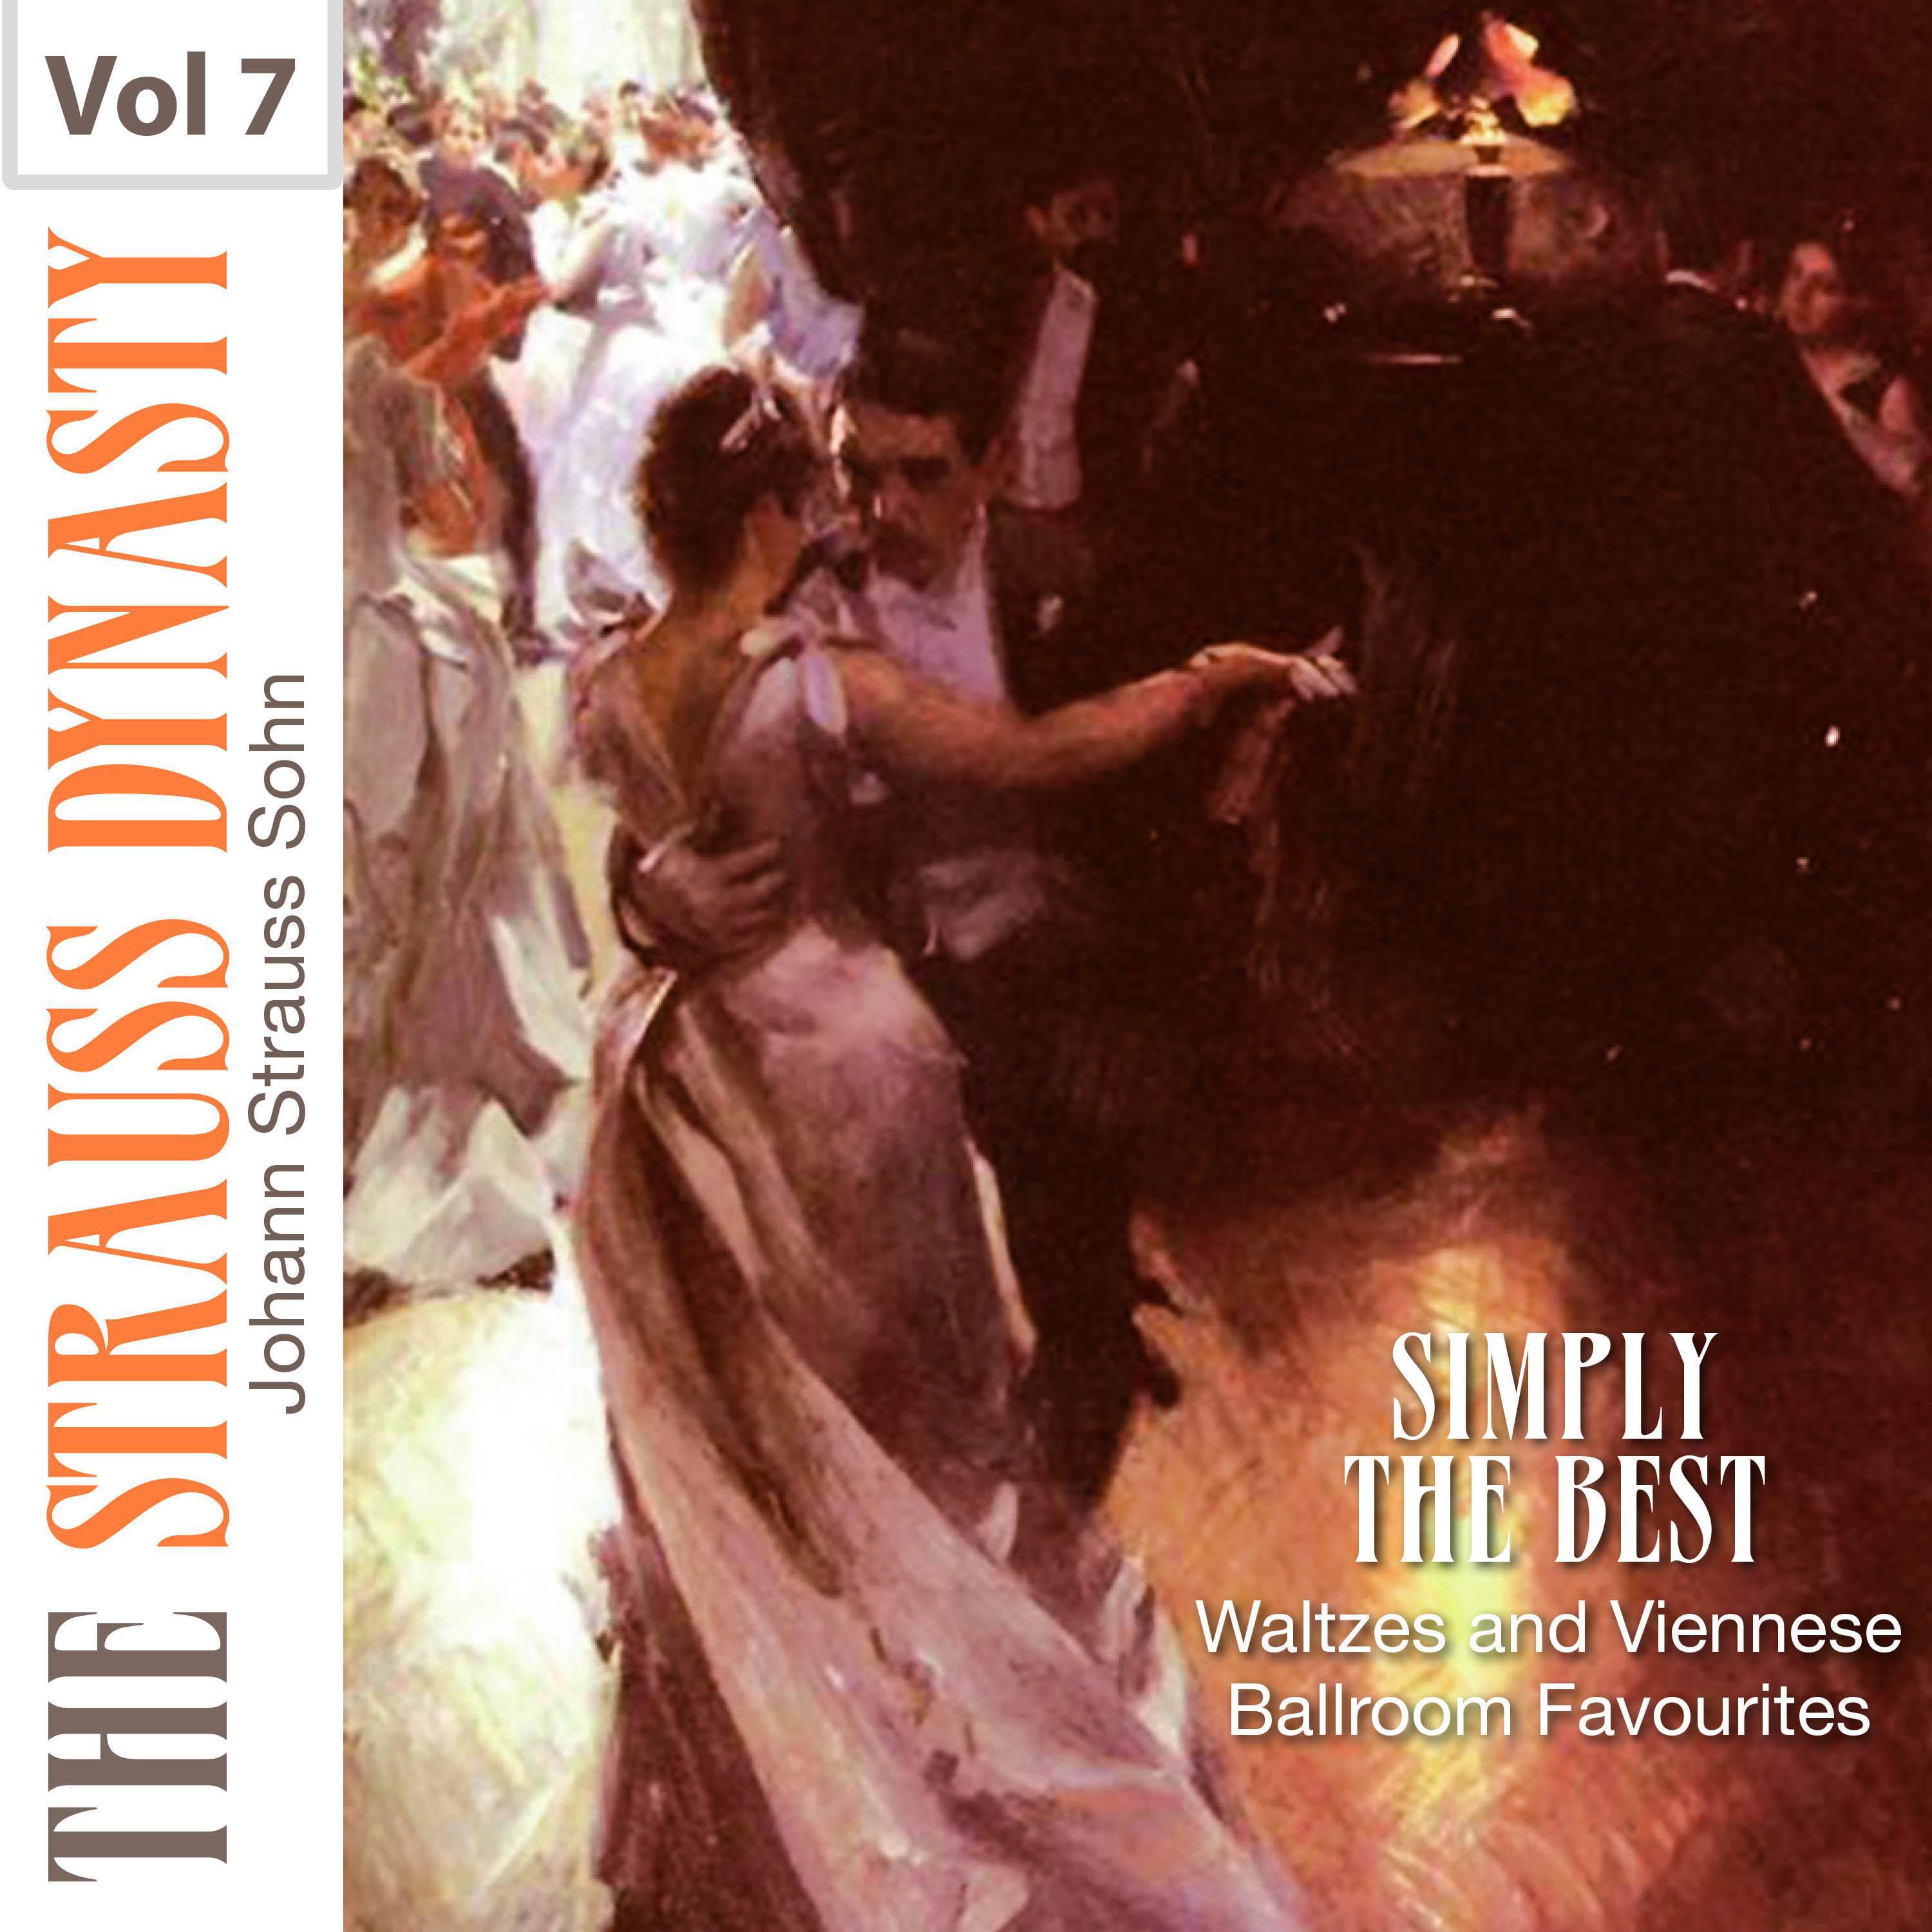 Simply the Best Waltzes and Viennese Ballroom Favourites, Vol. 7